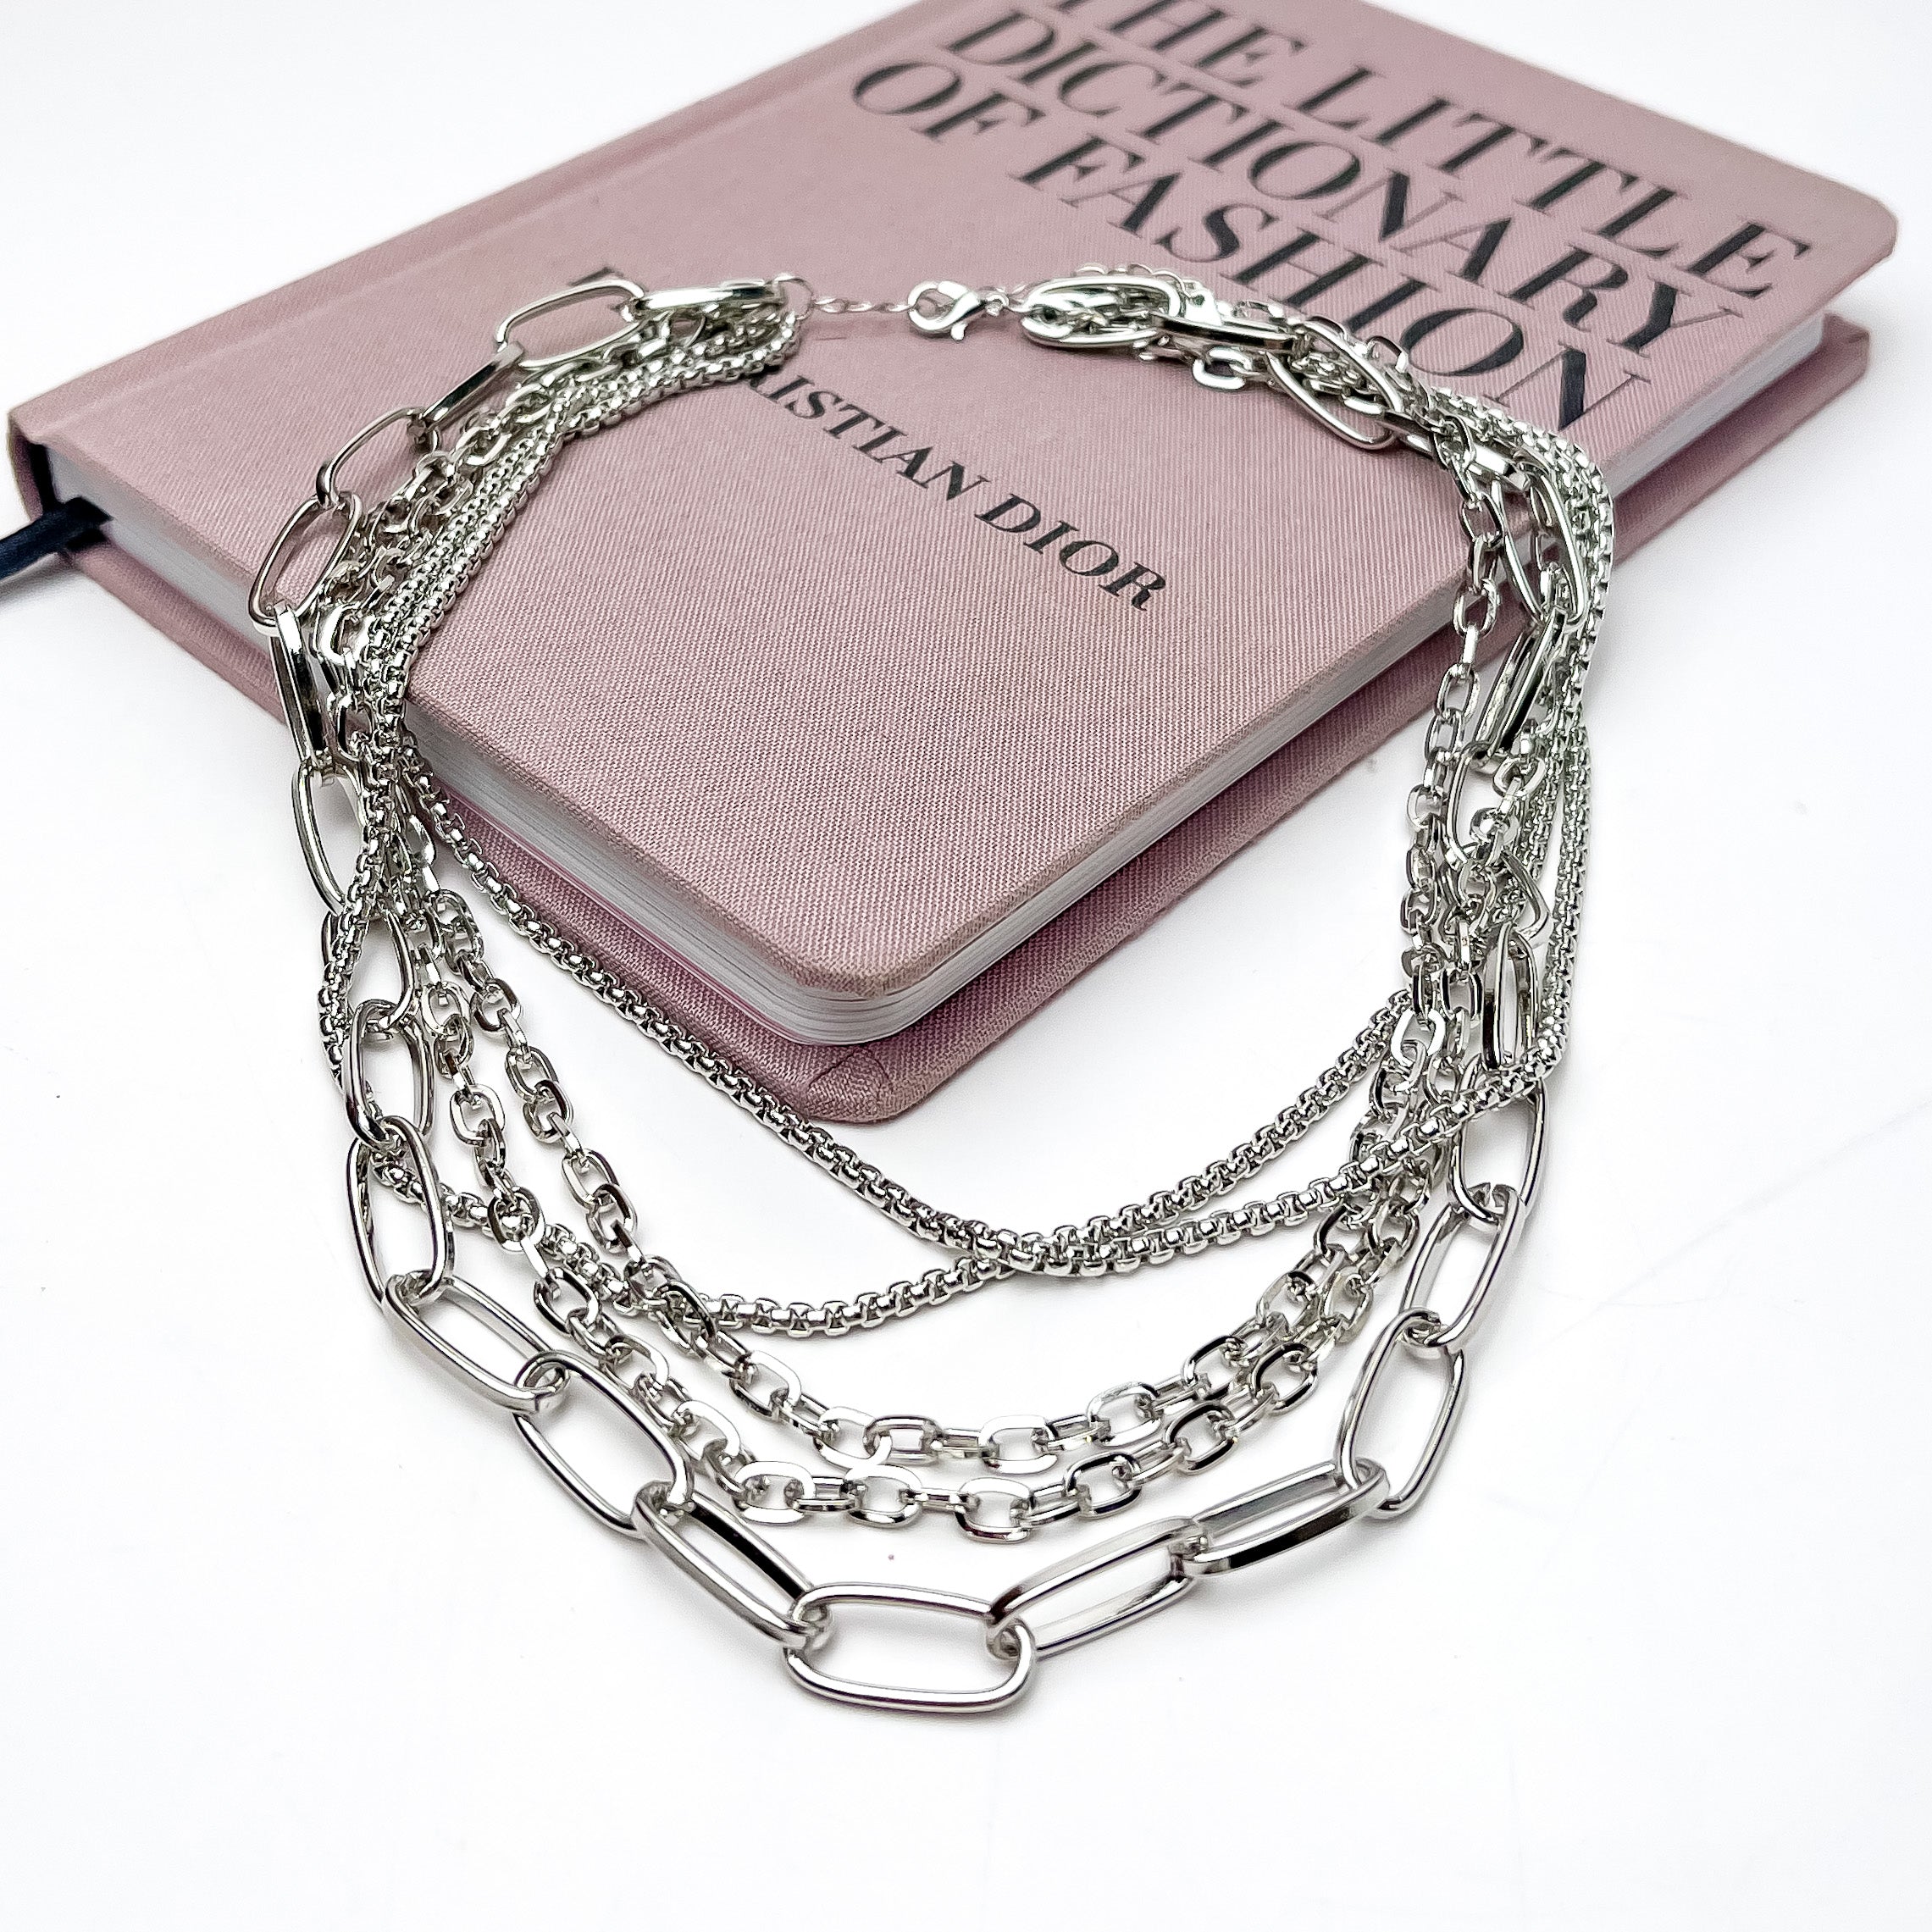 Sophisticated Silver Tone Chain Necklace. This necklace is on a white background with part of it on a pink book.